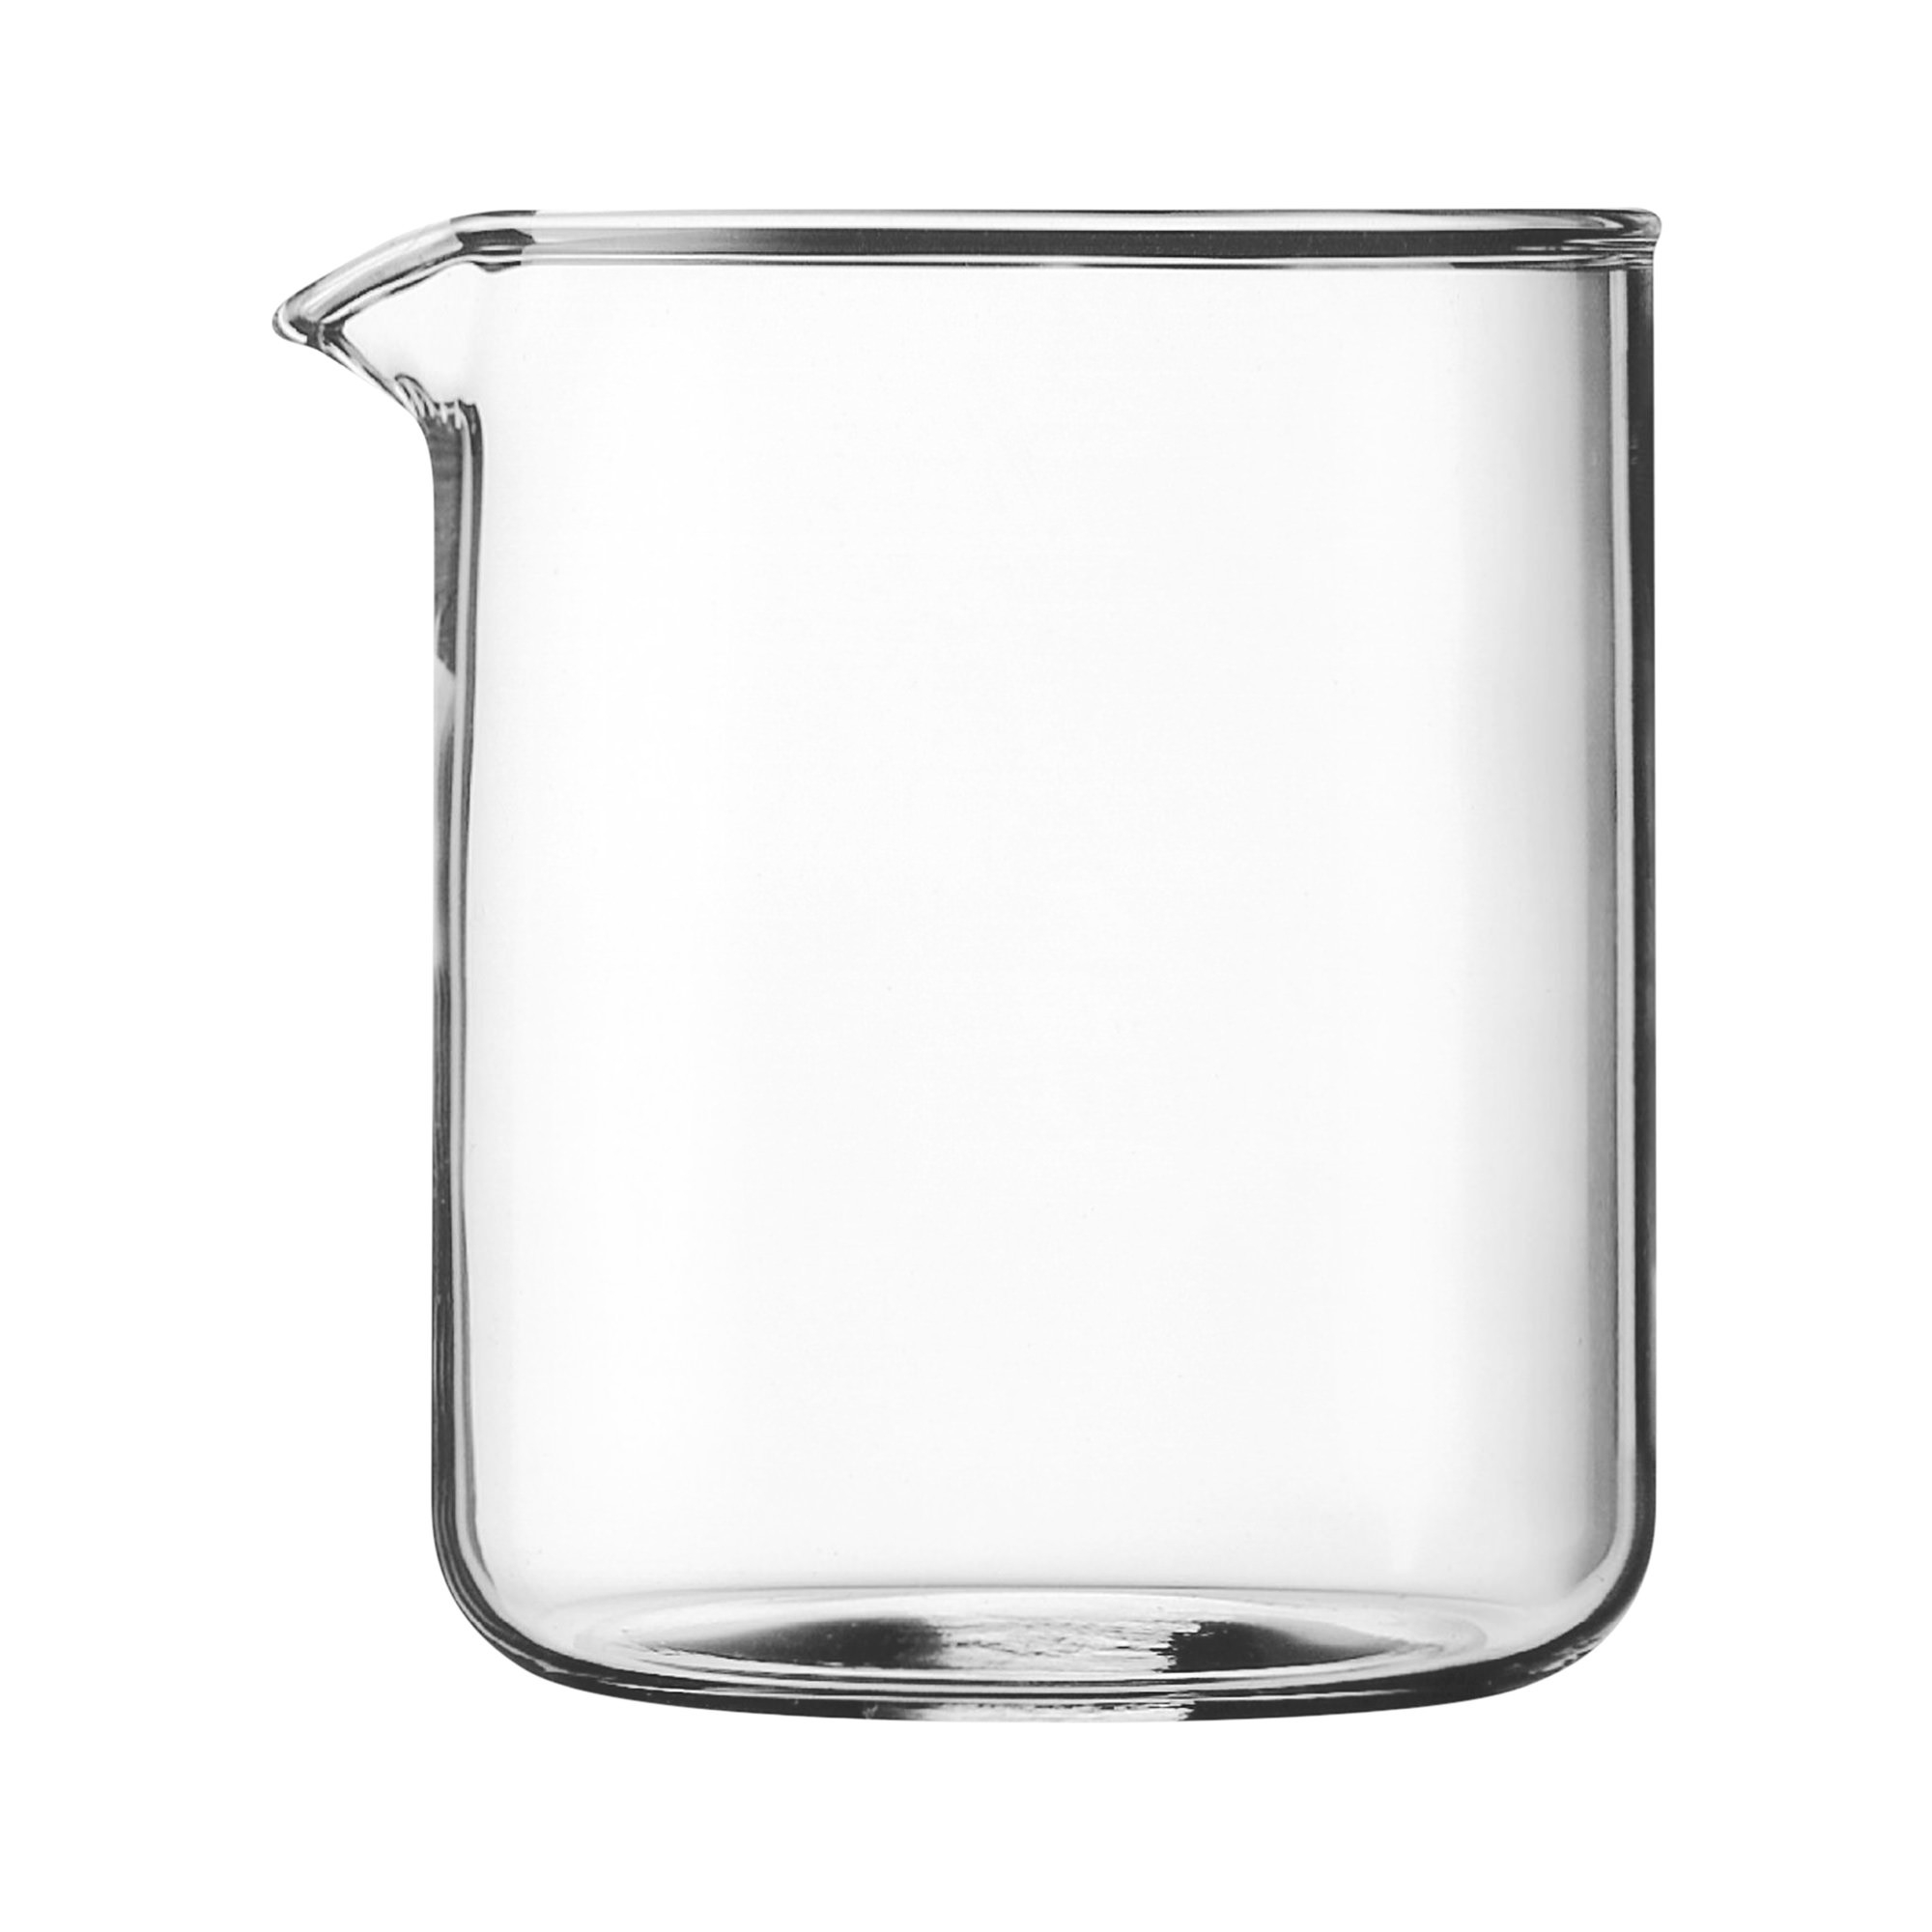 Bodum Spare Glass for Chambord Coffee Maker 4 Cup Image 1